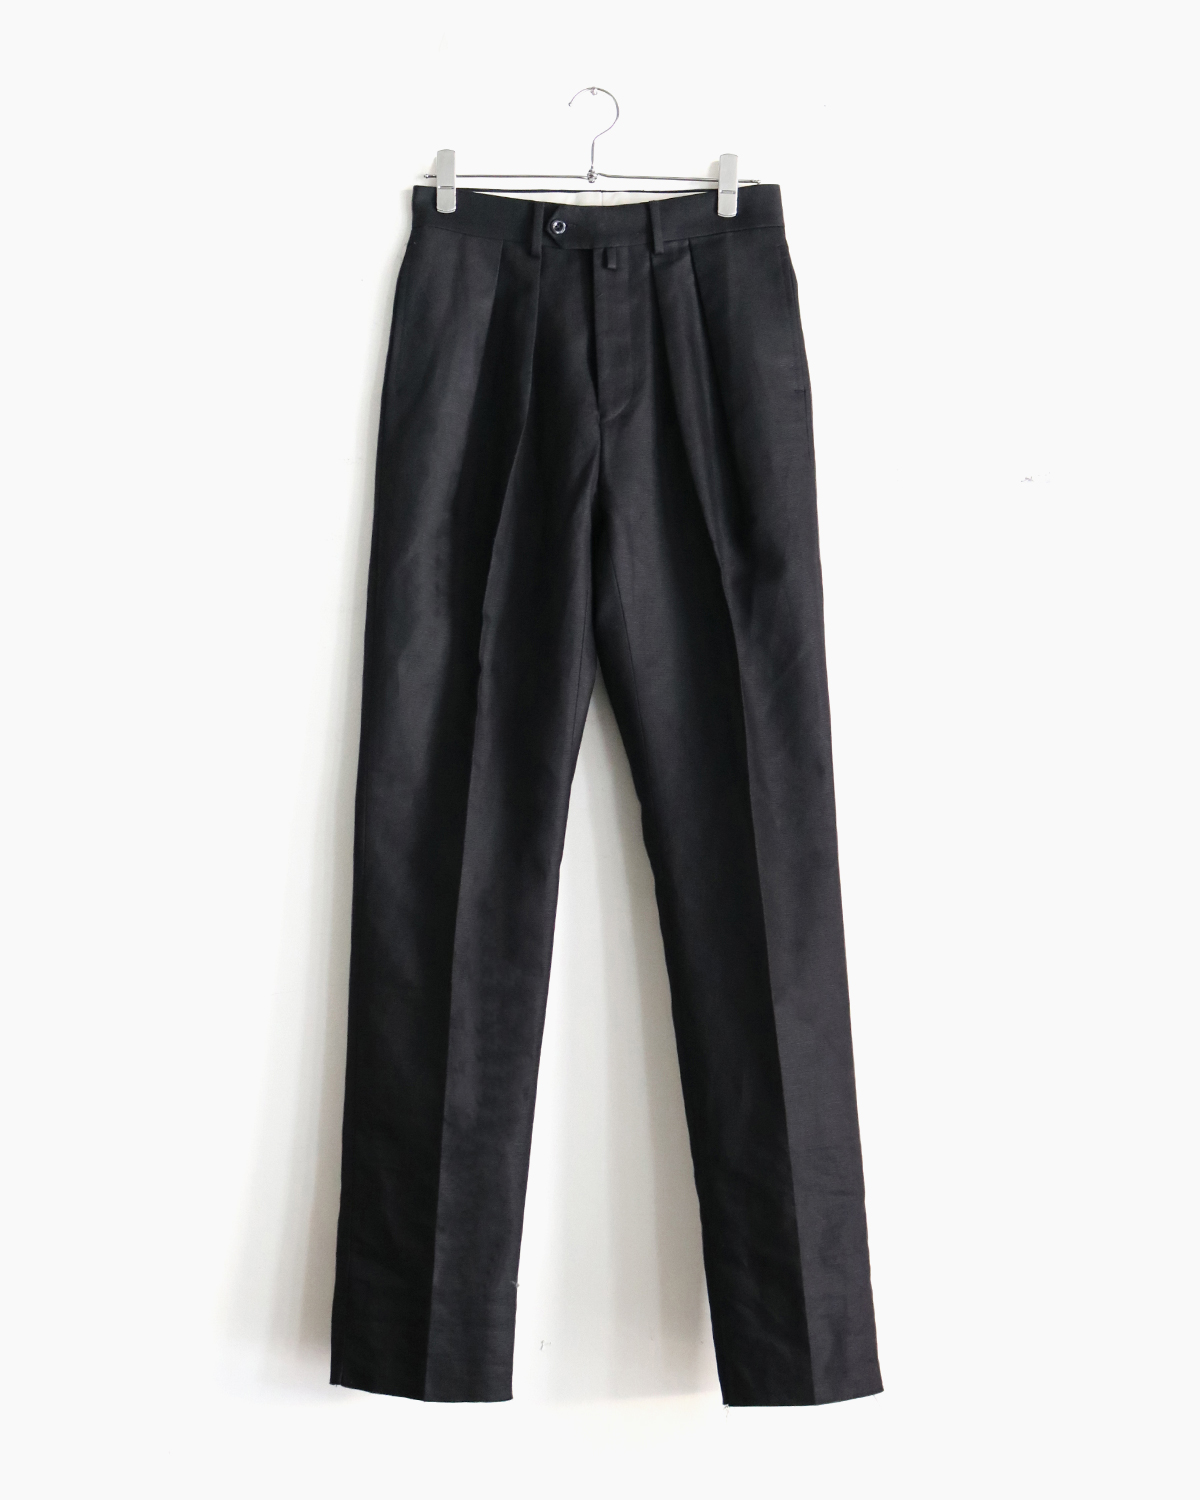 NEAT｜C/L OXFORD｜STANDARD - Black｜PRODUCT｜Continuer Inc ...